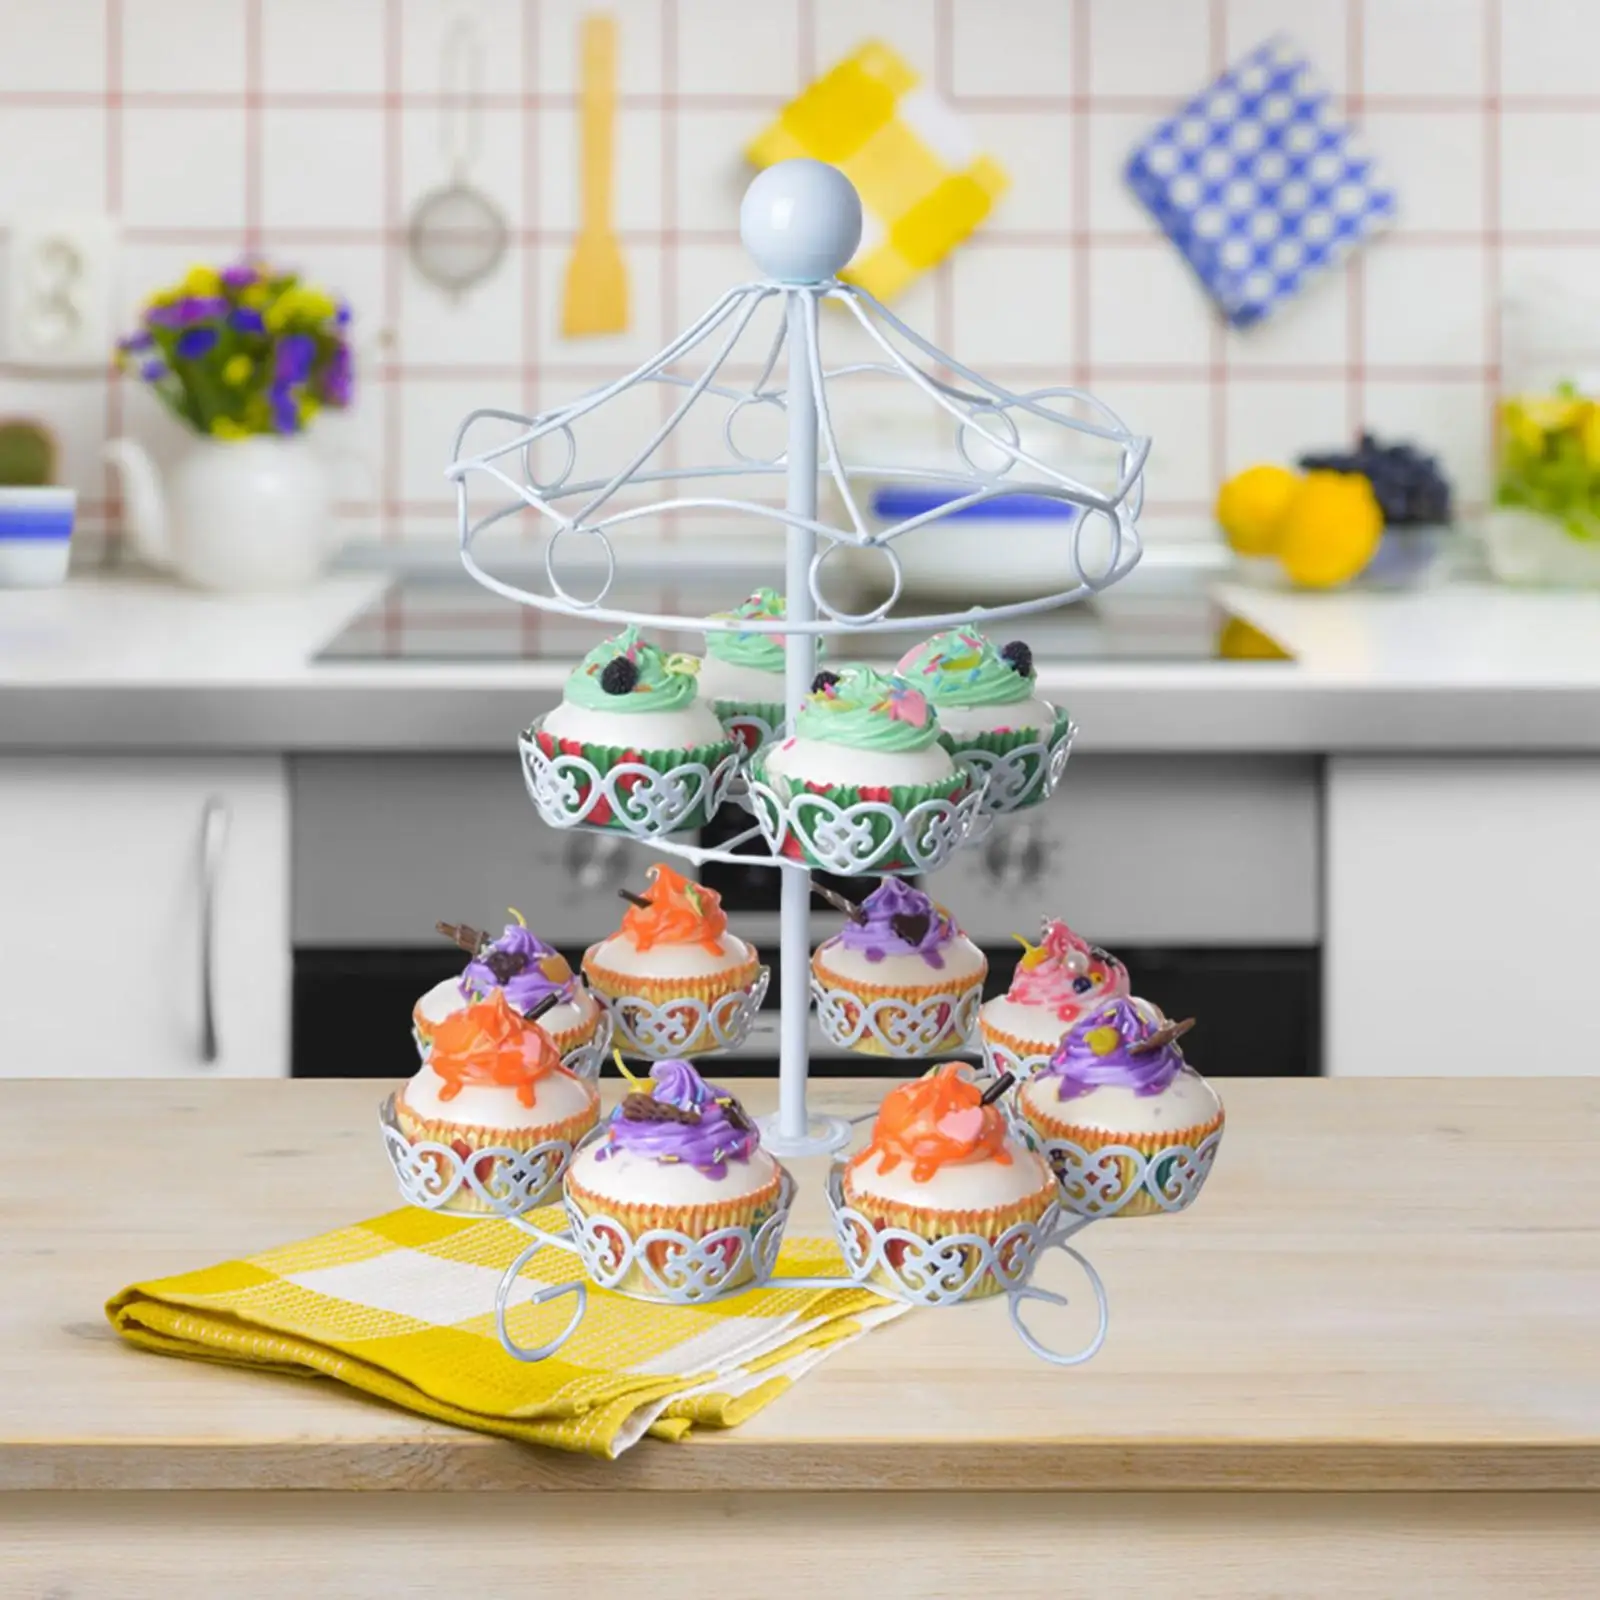 Multipurpose Cupcake Holder Display Stand Cake Holder Cake Display Server Tray for Wedding Anniversary Events Dining Table Decor